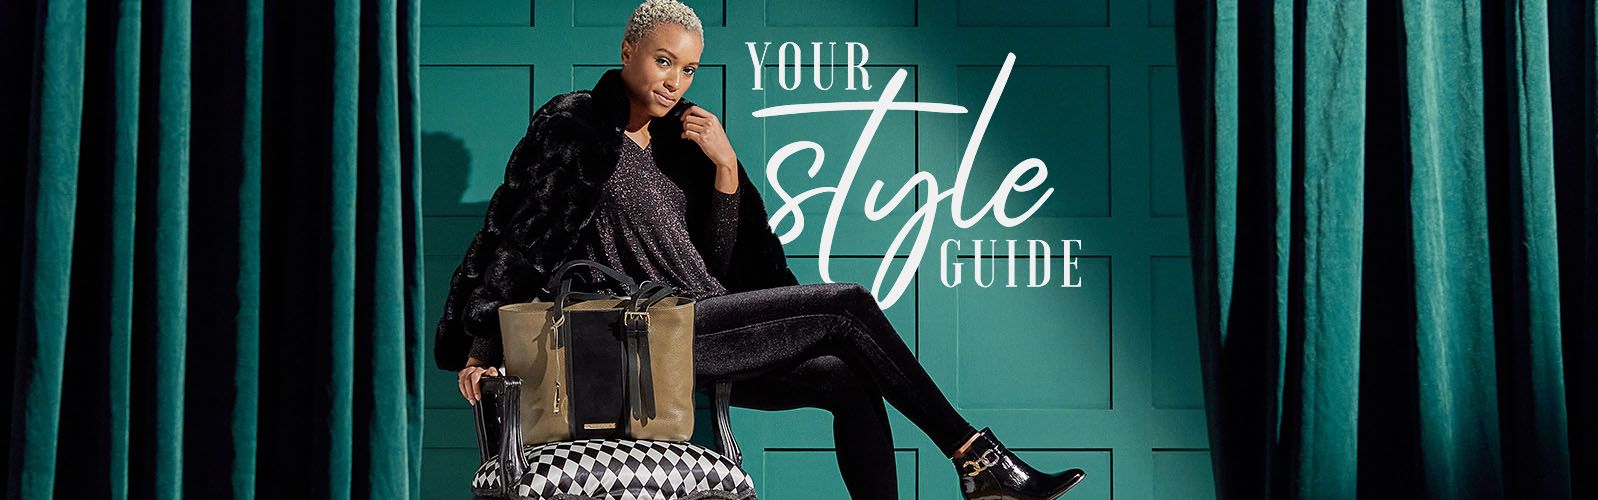 Your Style Guide - Time to Shine